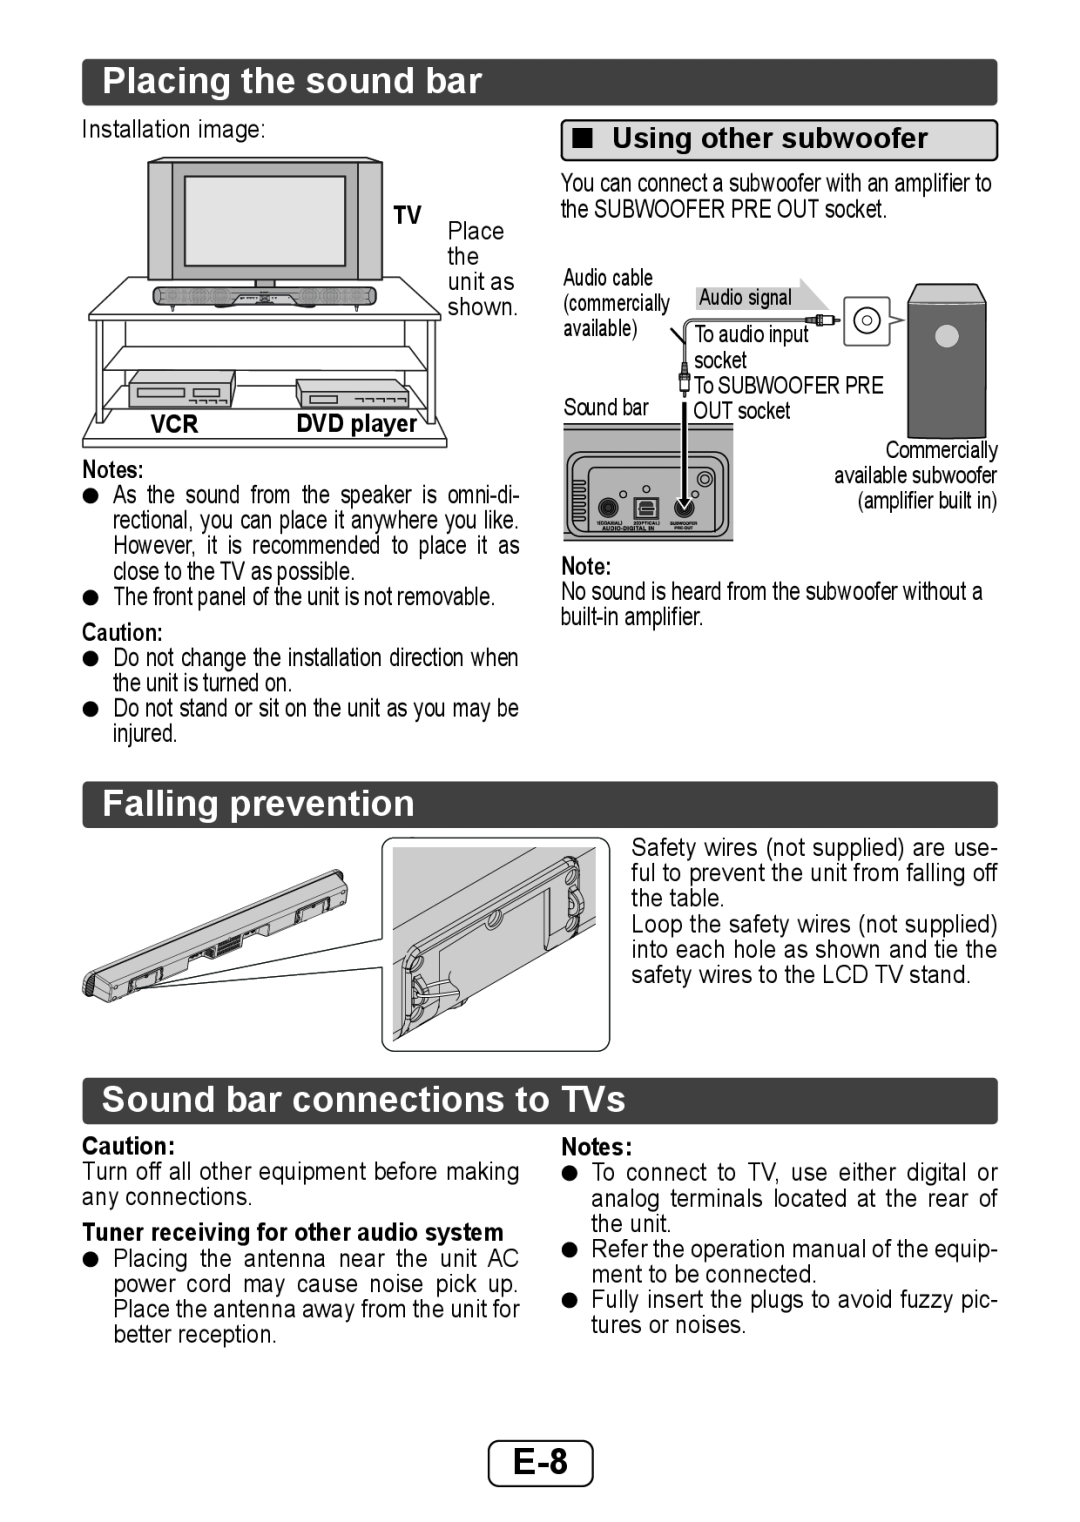 Sharp HTSB350 Placing the sound bar, Falling prevention, Sound bar connections to TVs, Using other subwoofer, Place 